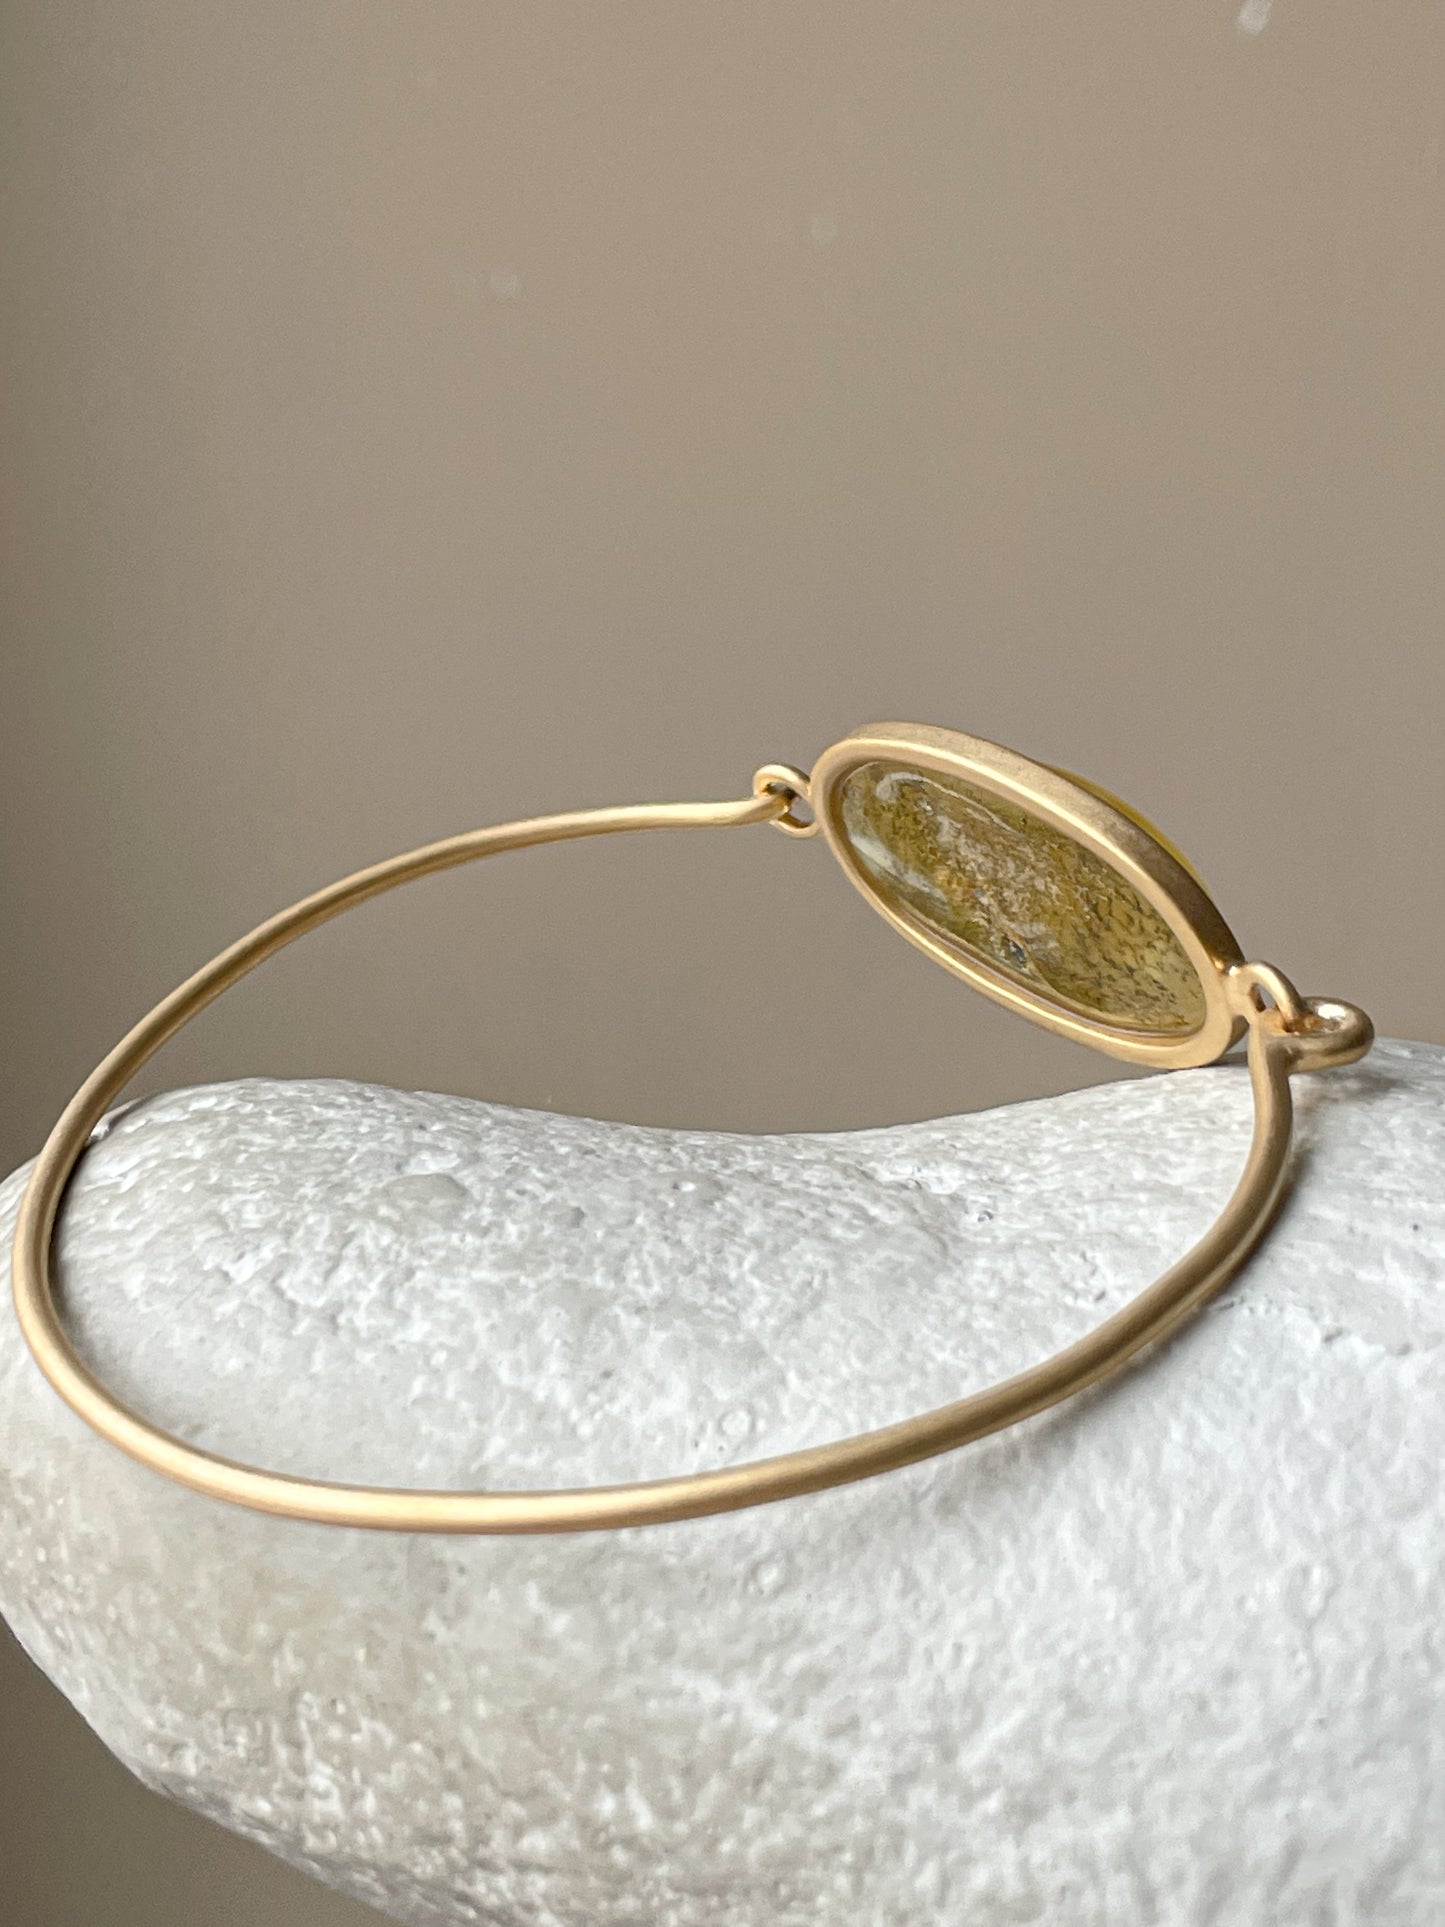 Green amber bangle bracelet - gold plated silver, size 7